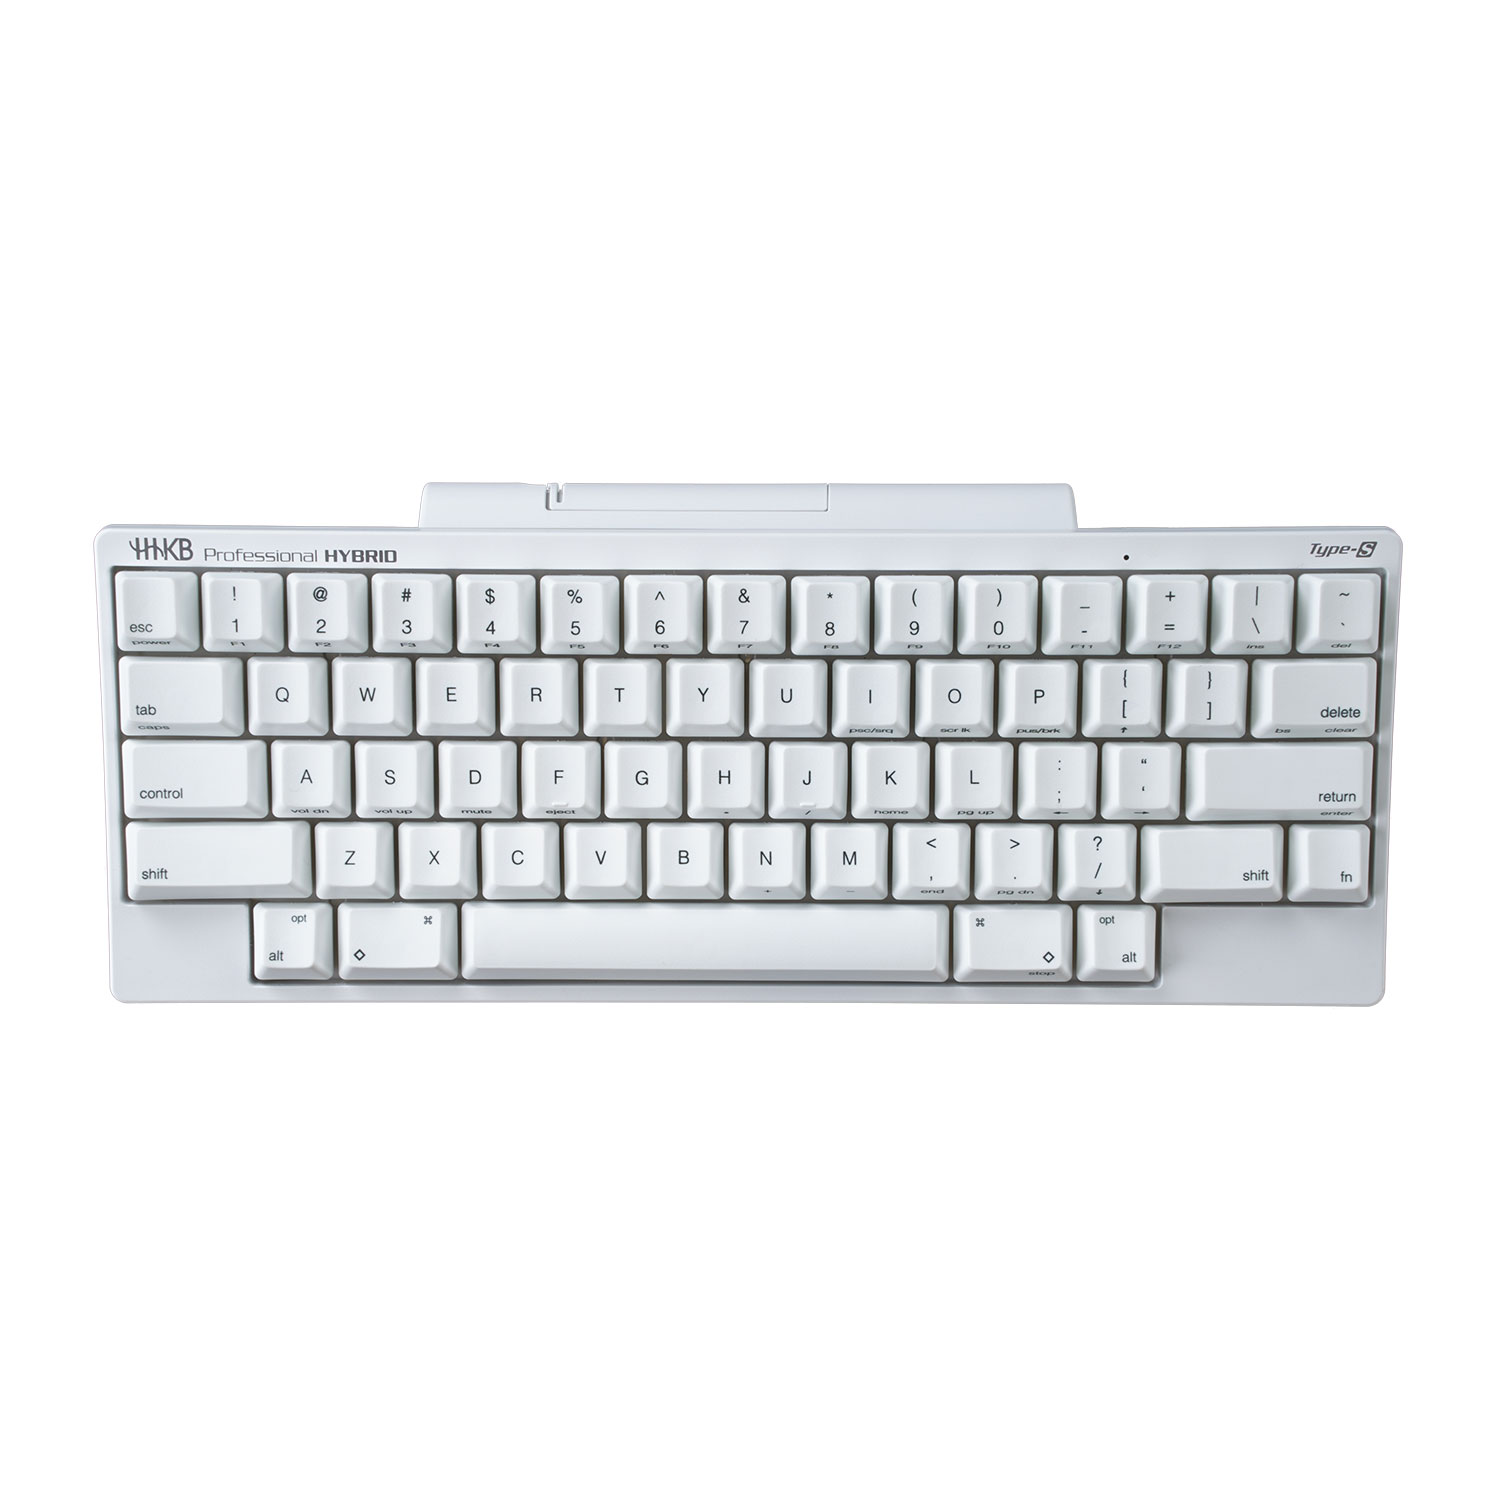 HHKB HYBRID Type-S Snow Keyboard in pure white with printed keycaps